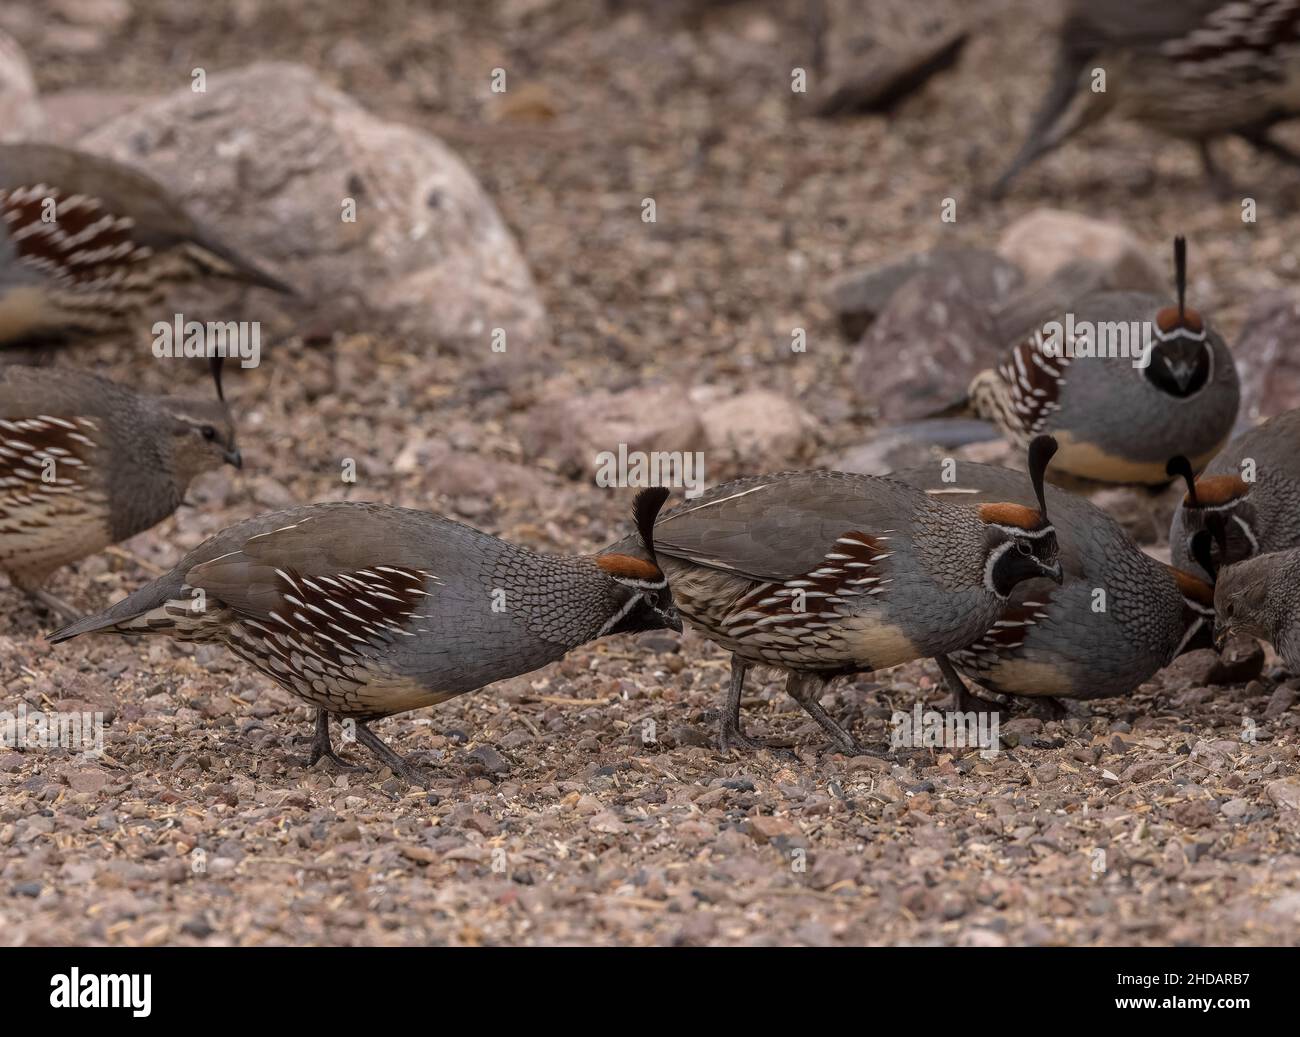 Group of Gambel's quails, Callipepla gambelii, below a bird feeder in garden in the Chihuahua Desert, New Mexico. Stock Photo